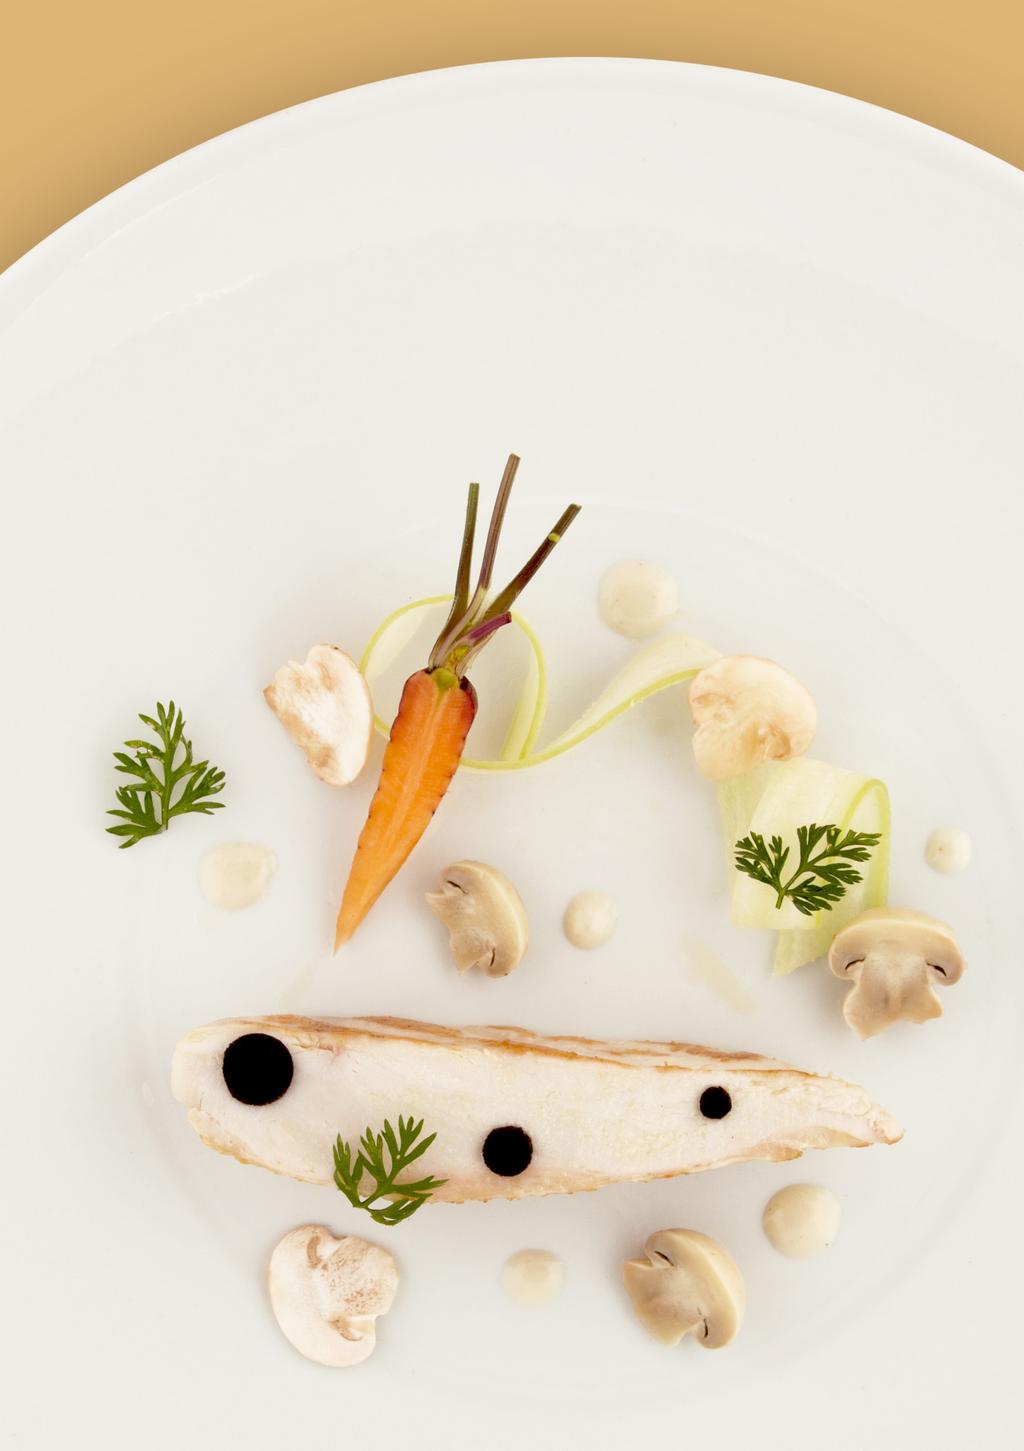 Pleasure Sublime flavours, Michelin-starred menus, in Business class, Air France offers exceptional cuisine.